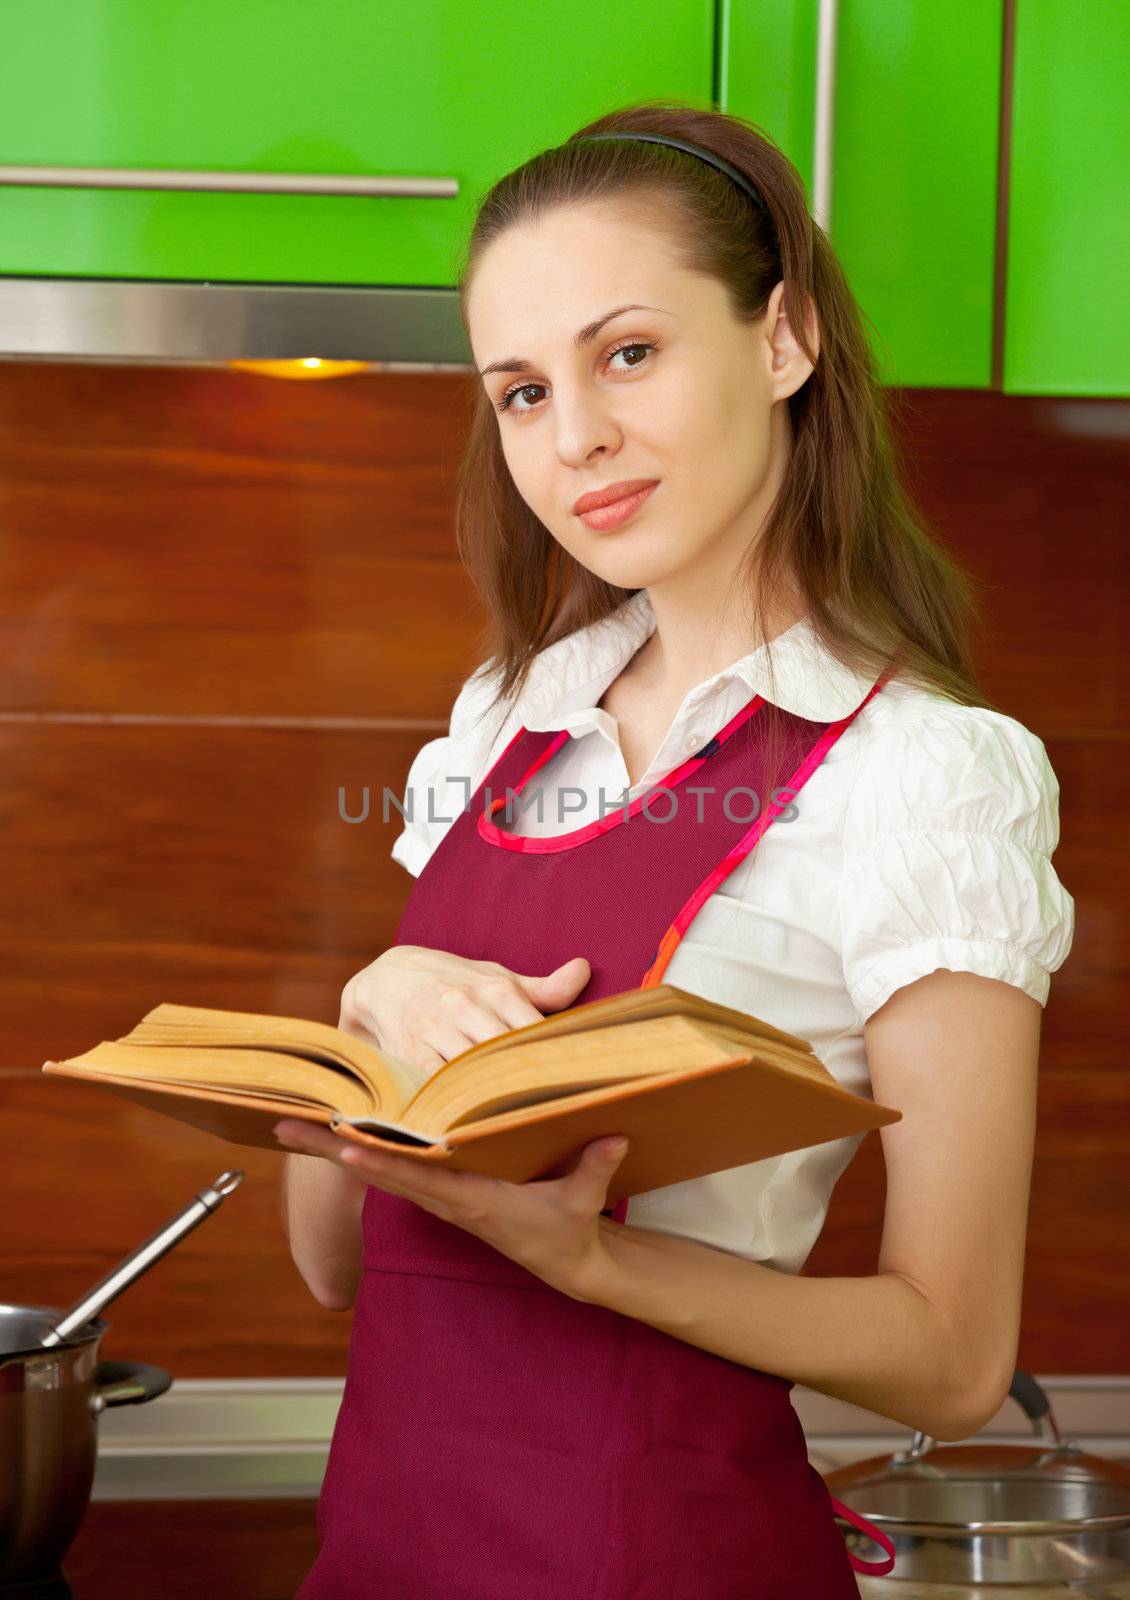 Woman reading a cookbook on kitchen by pzaxe